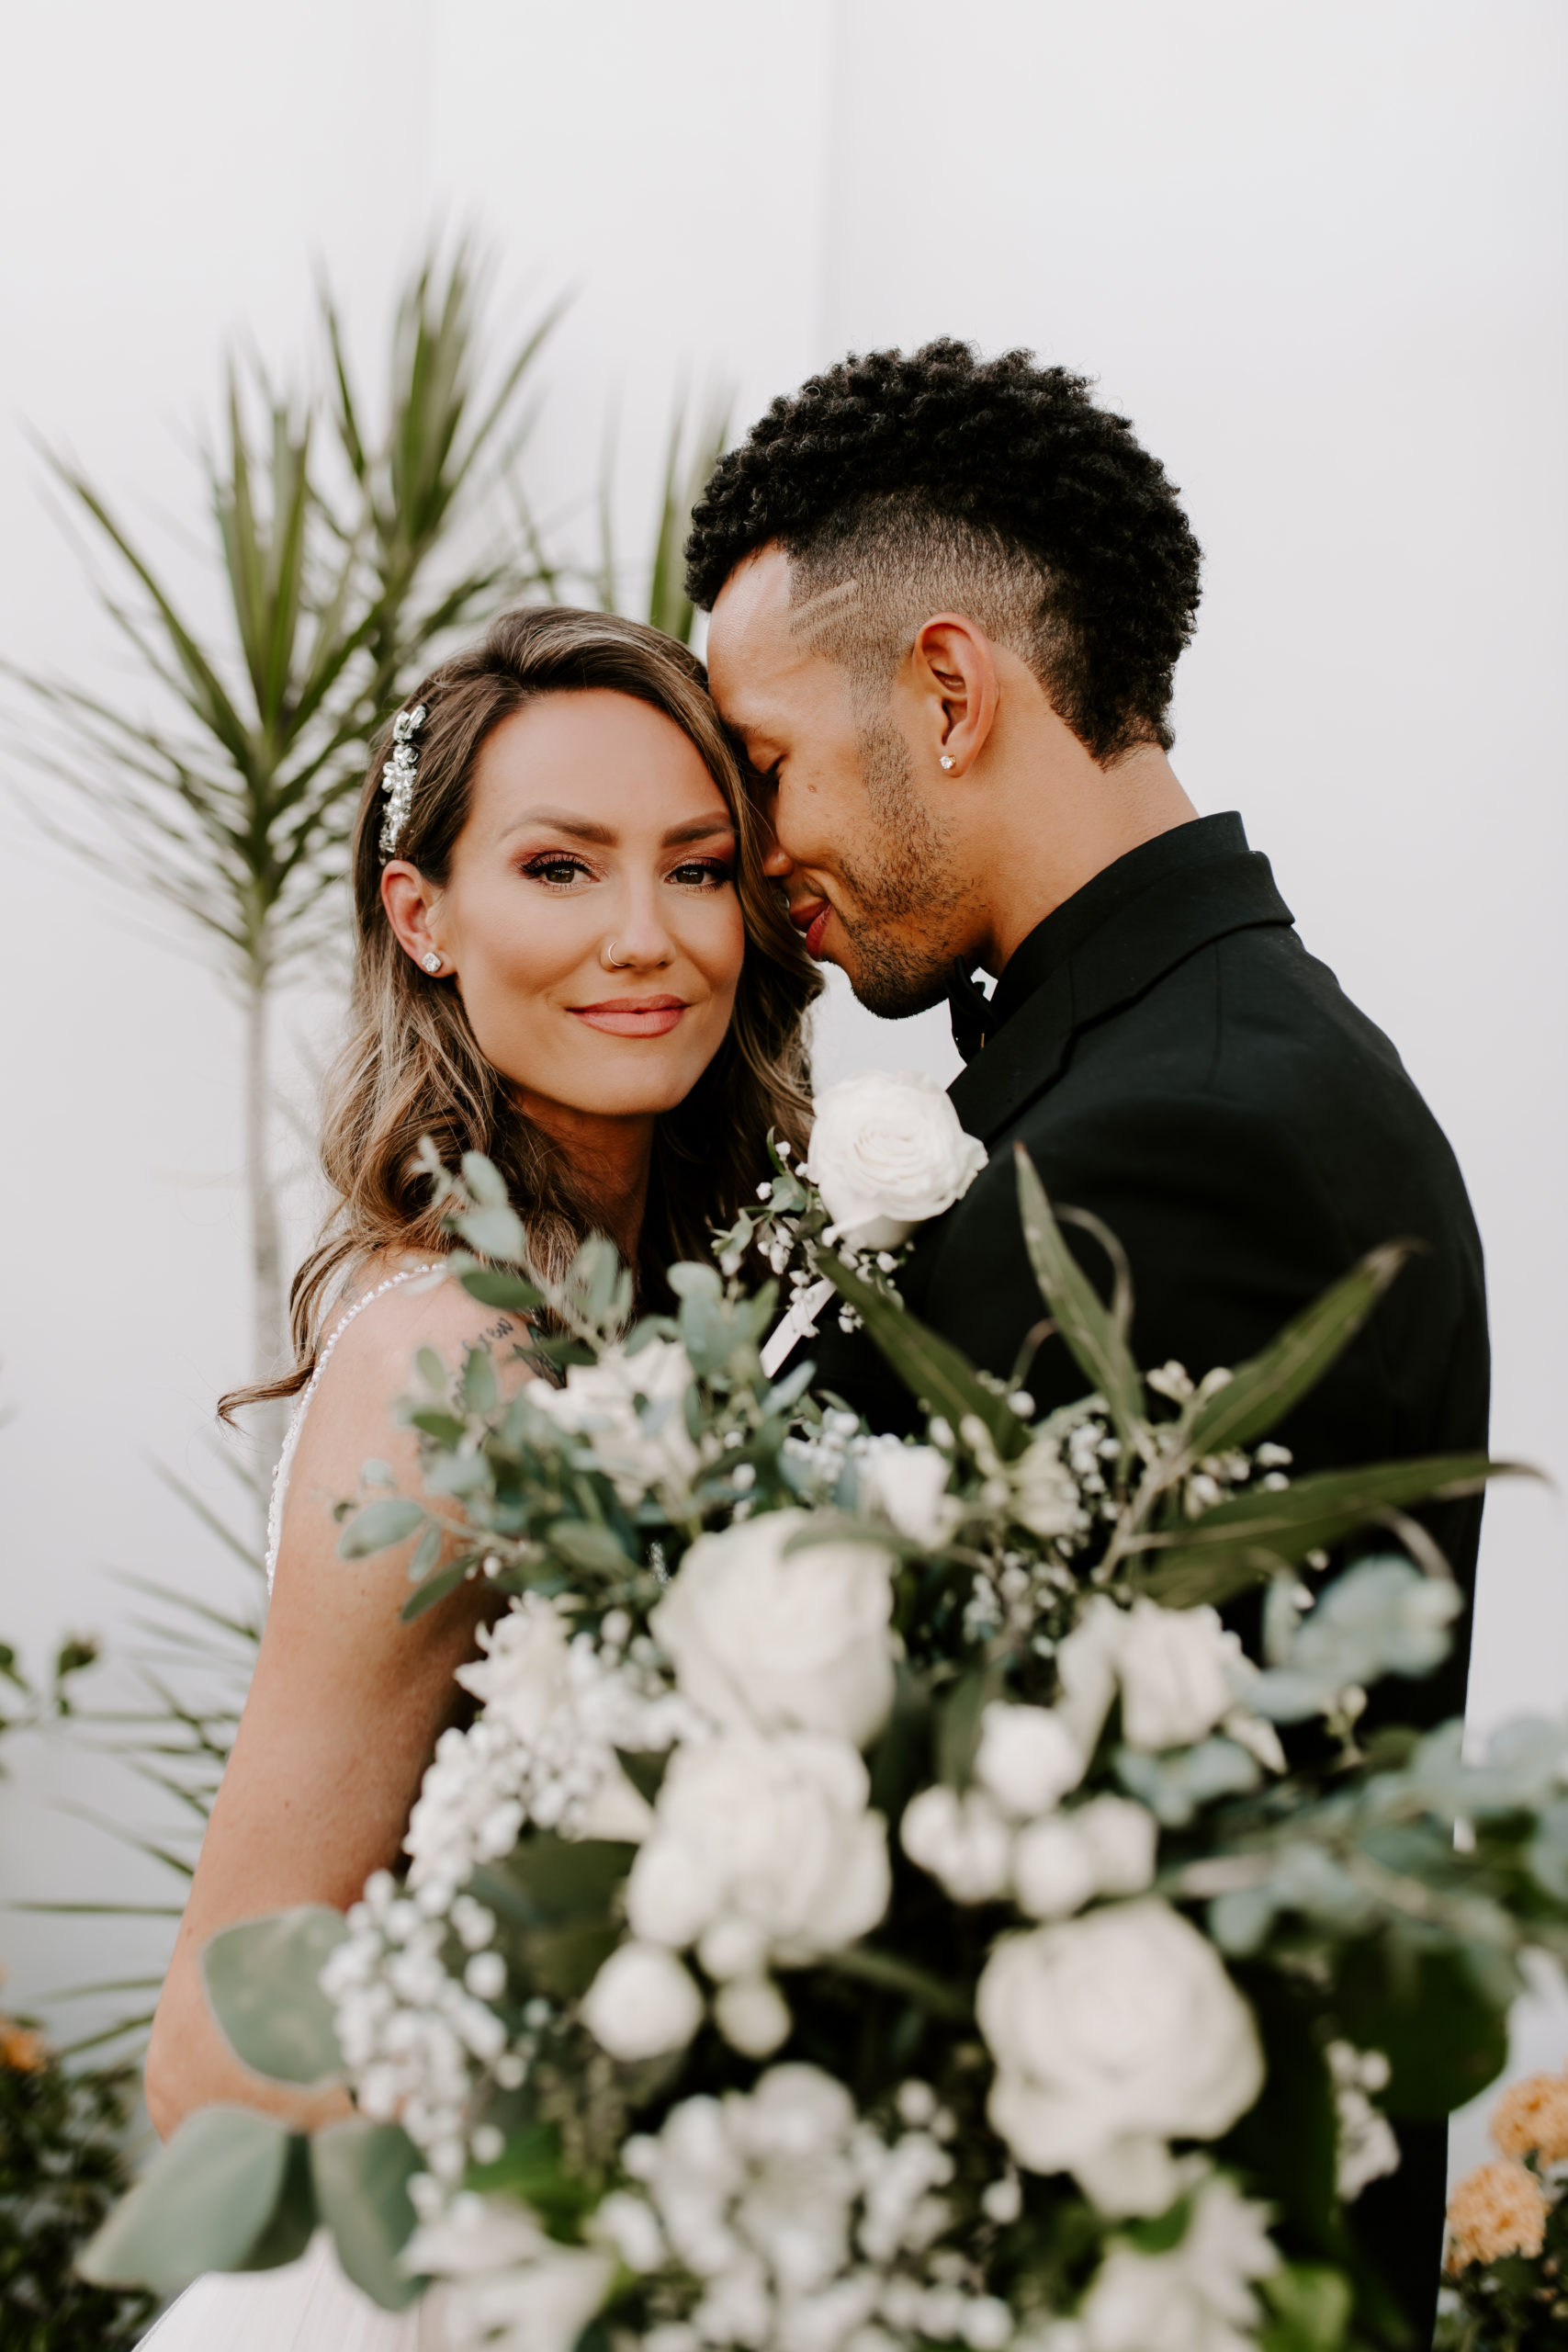 Groom presses his head against the bride's as she smiles enchantingly at the camera while holding her bridal bouquet, captured by Off Path Photography